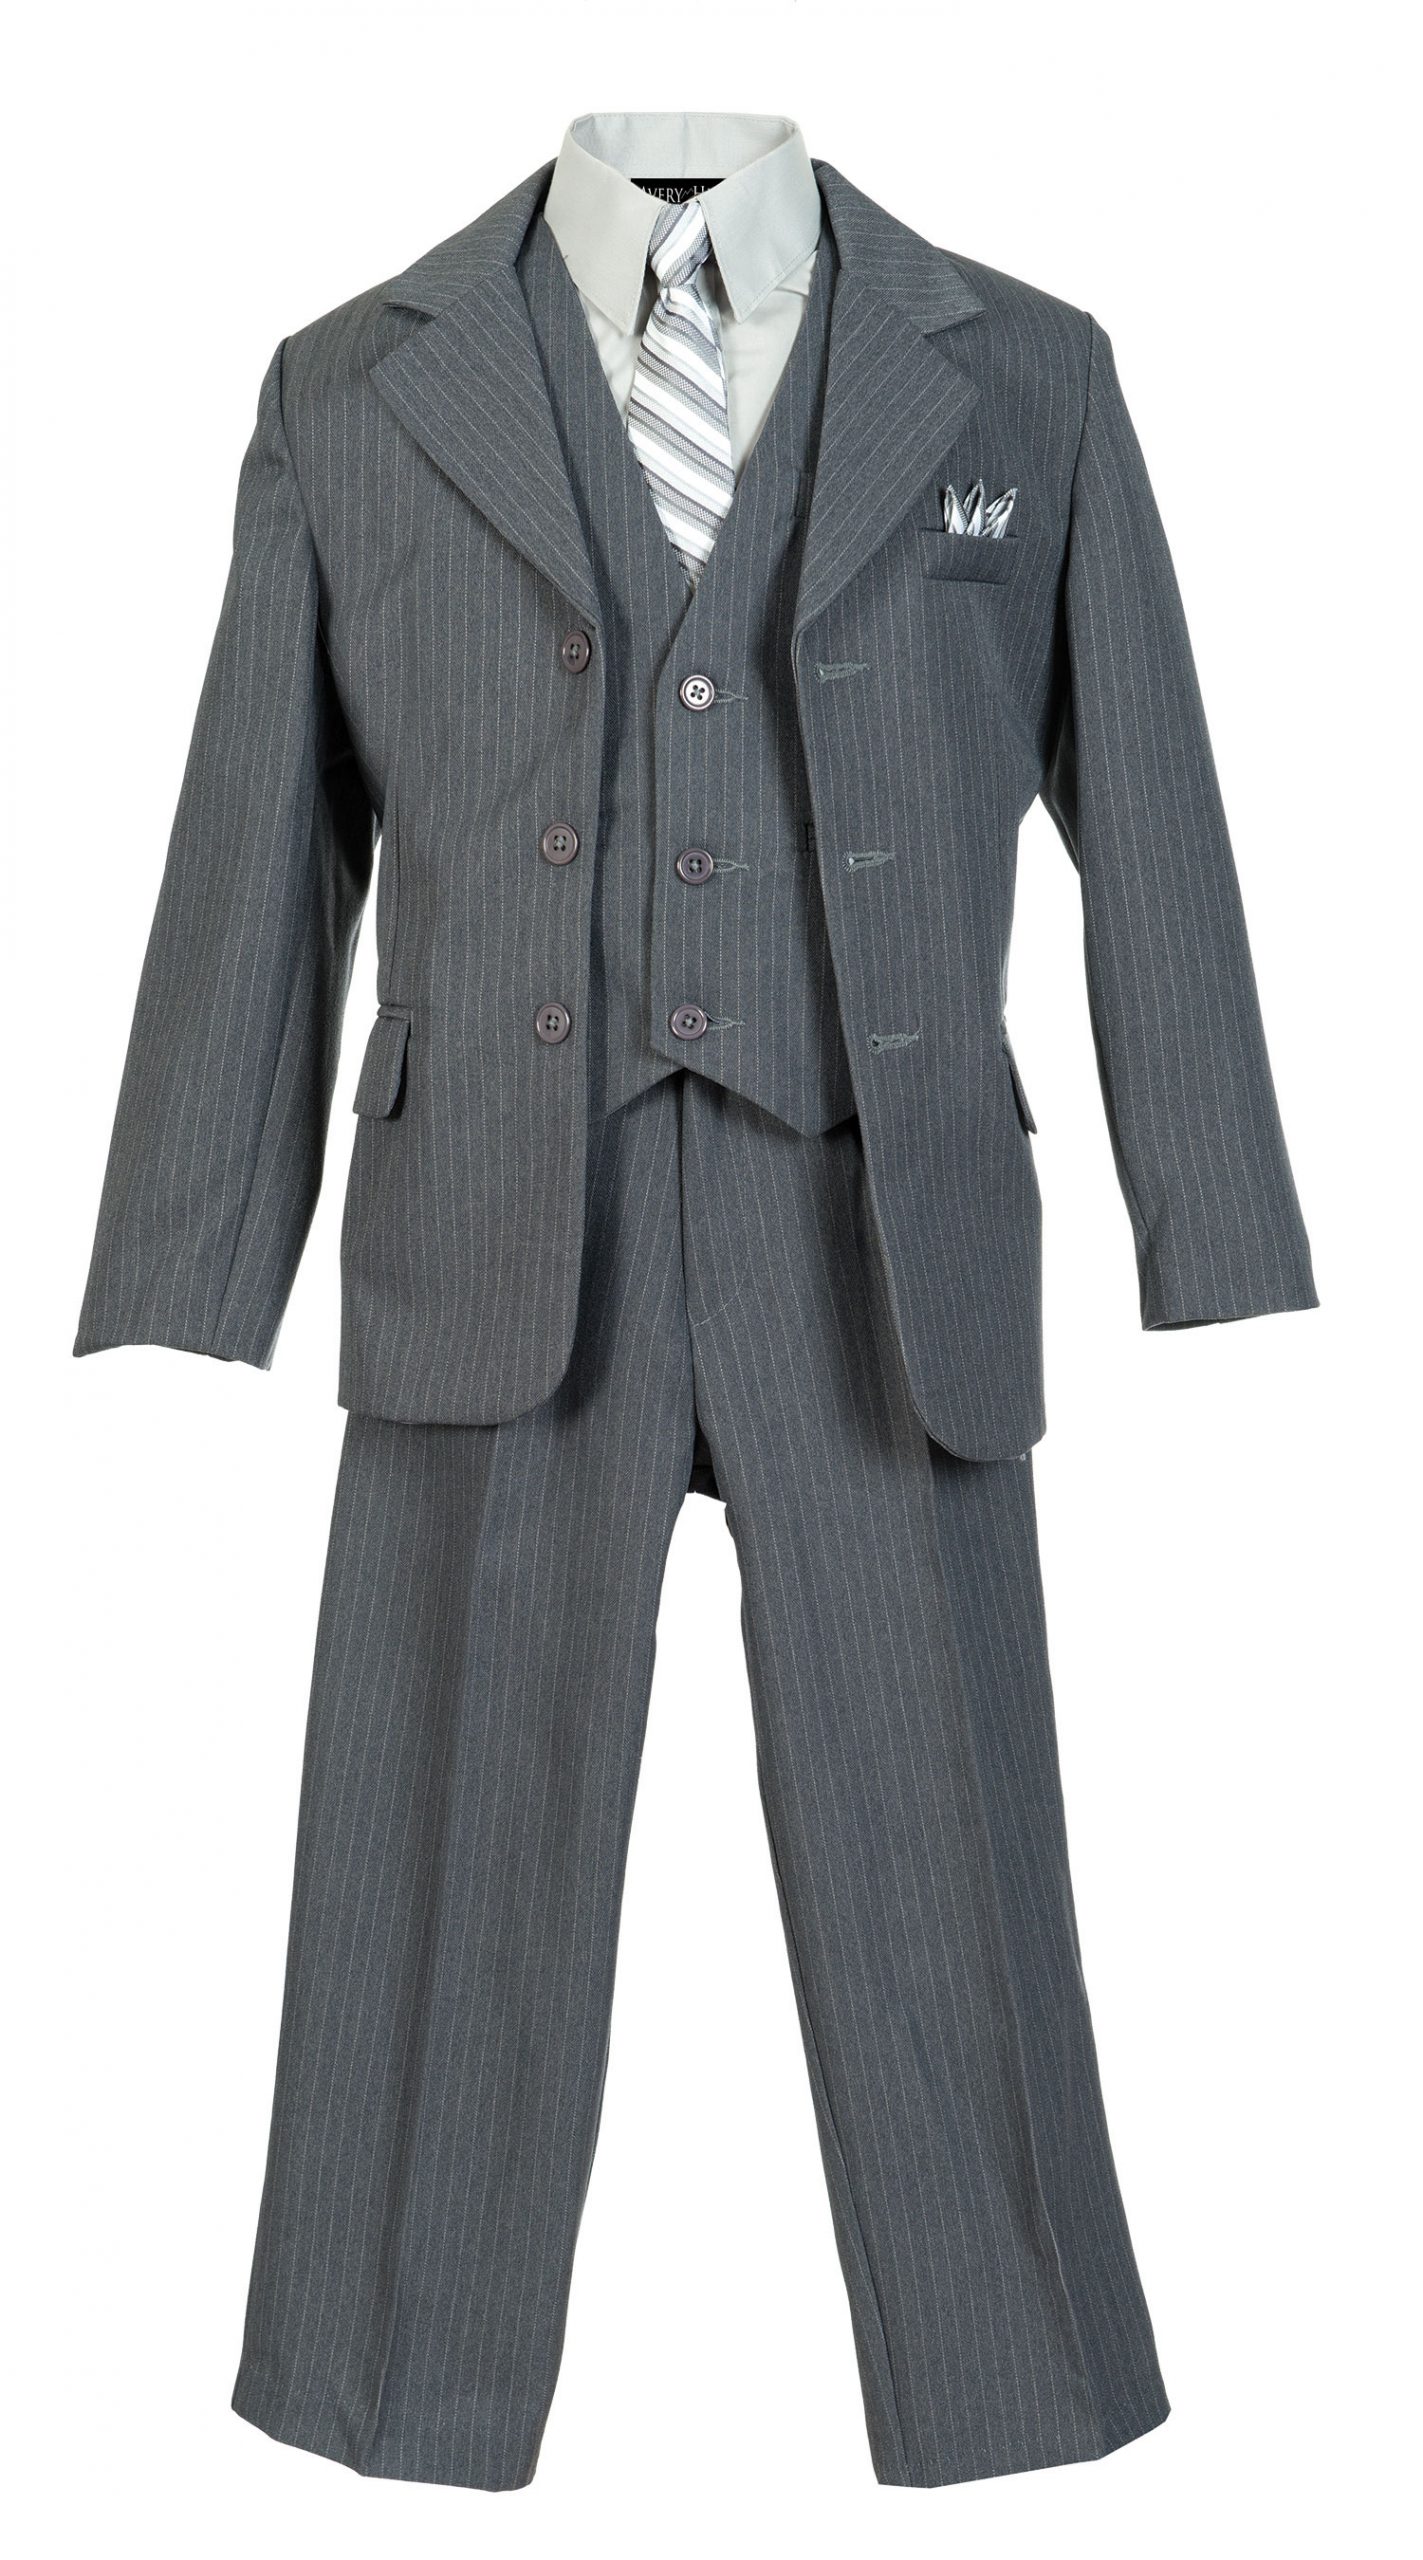 Boys Pinstripe Suit Set with Matching Tie LTGY 6